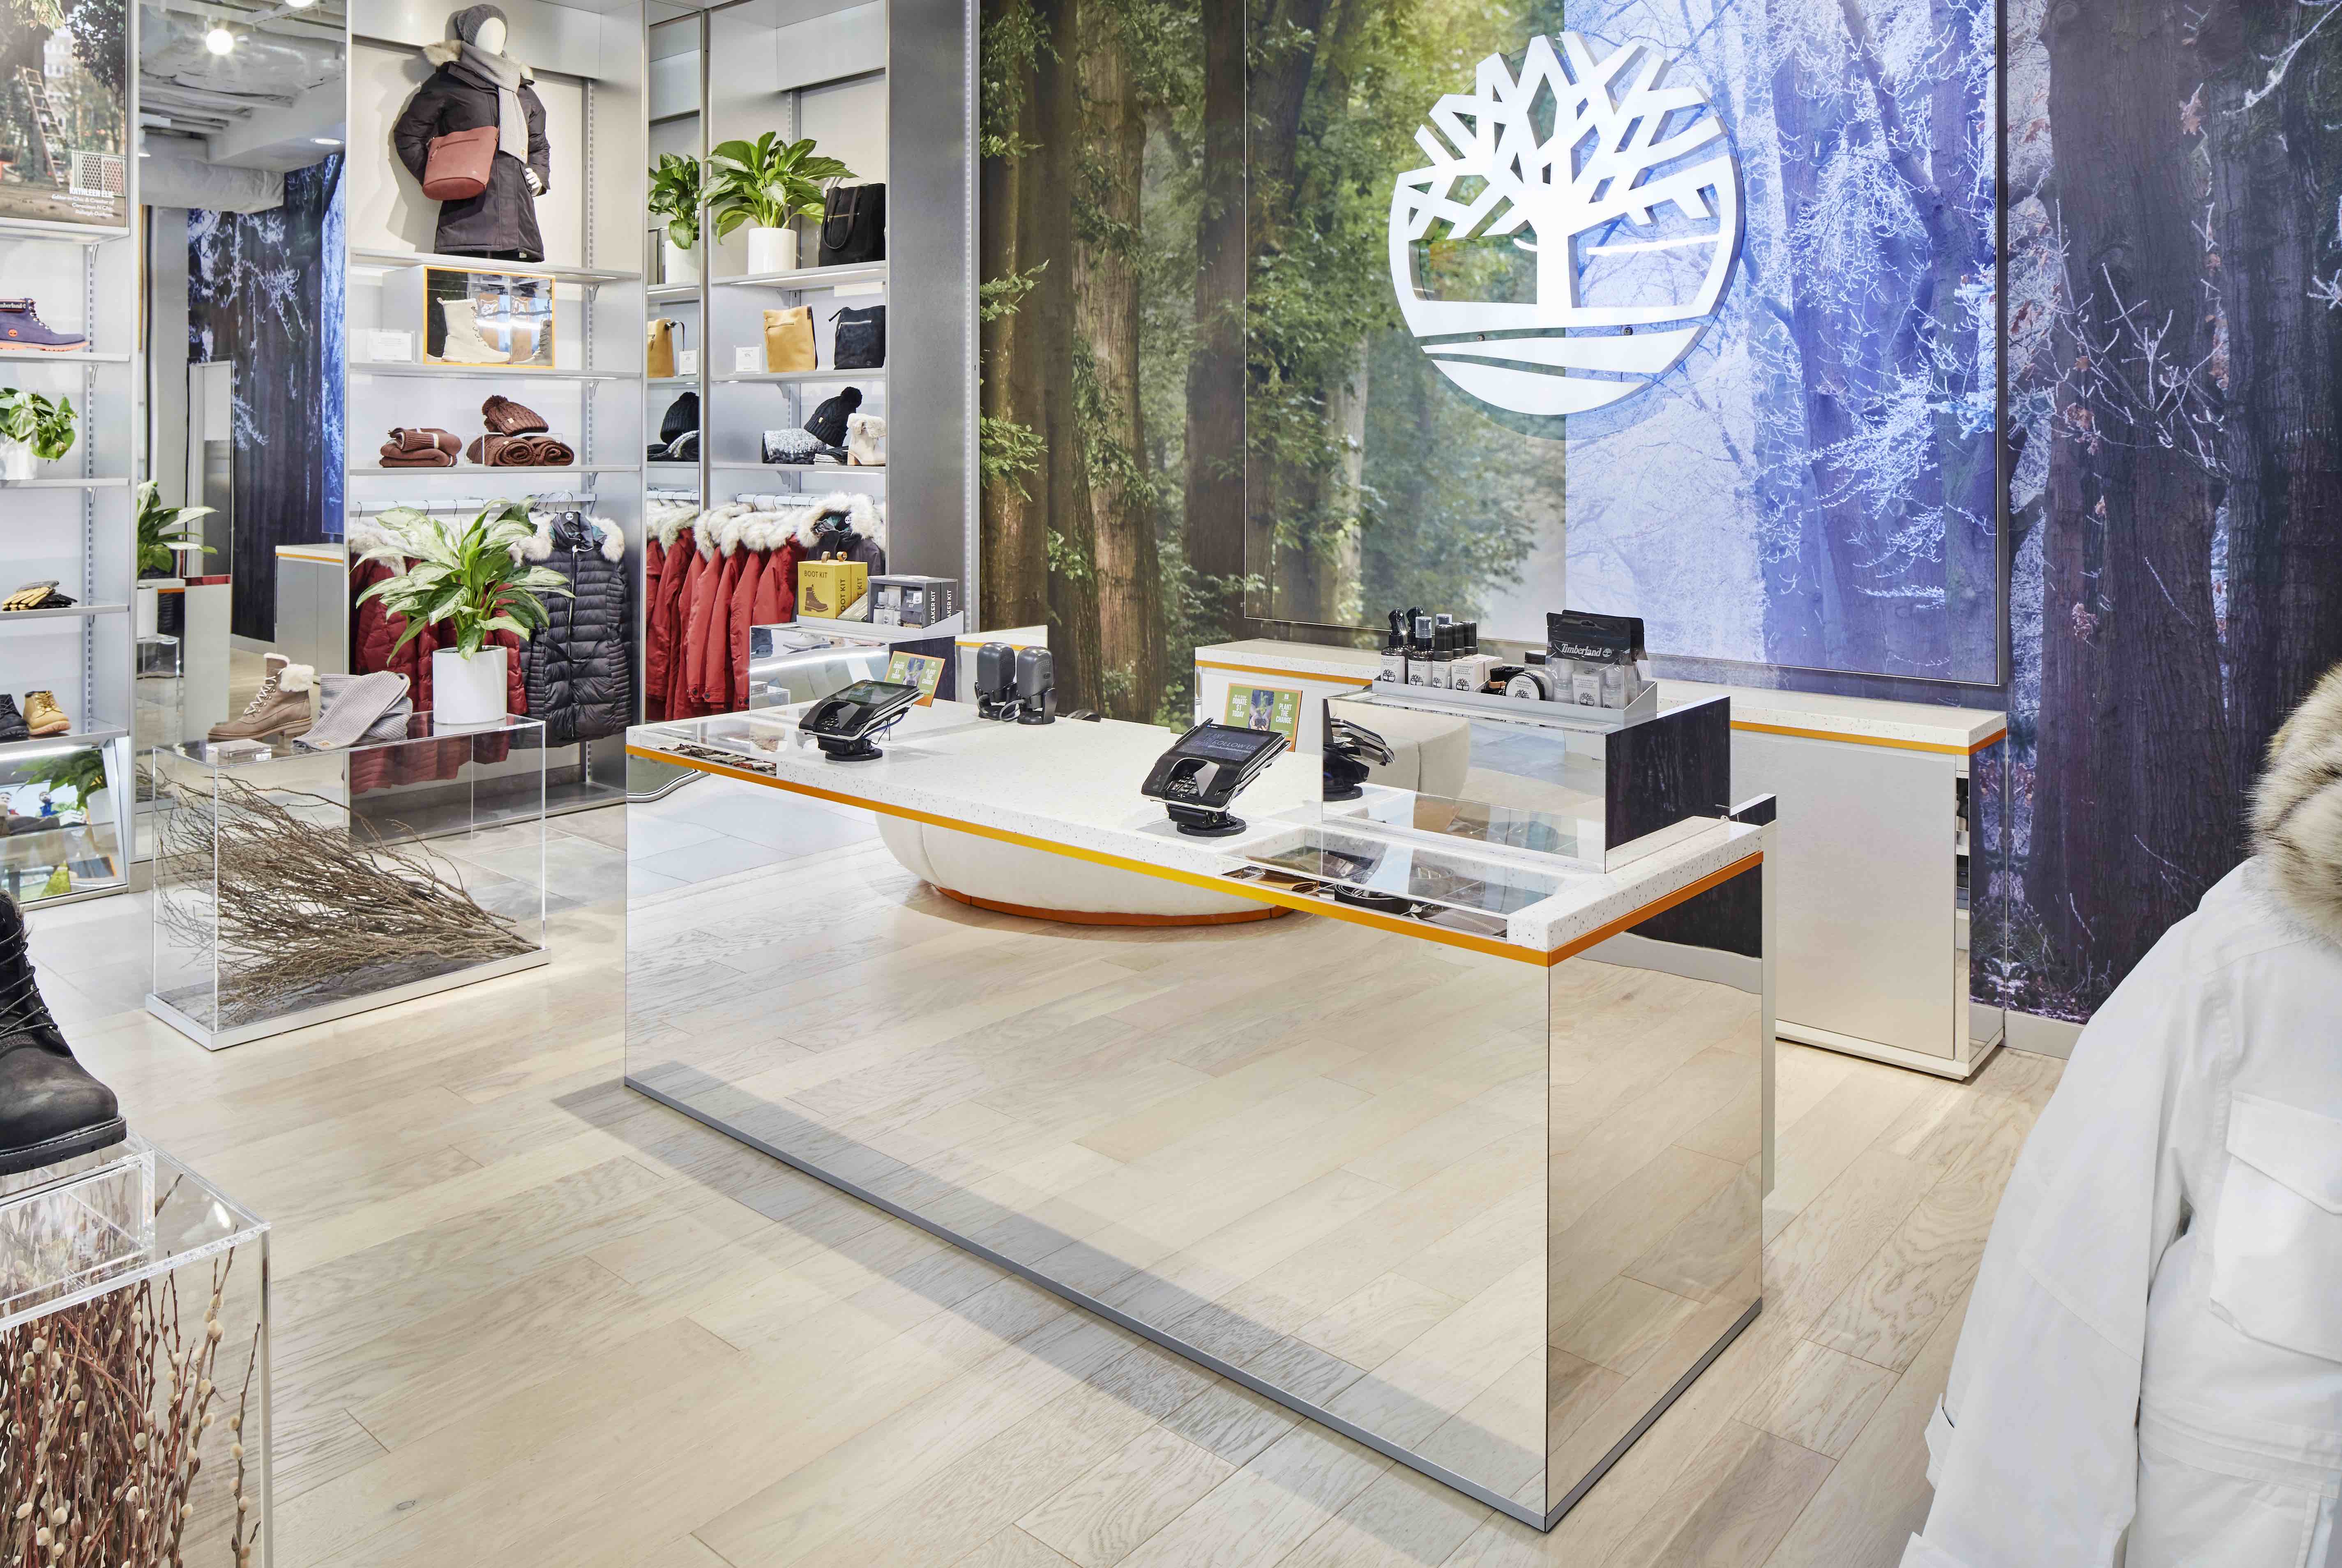 timberland store 5th ave